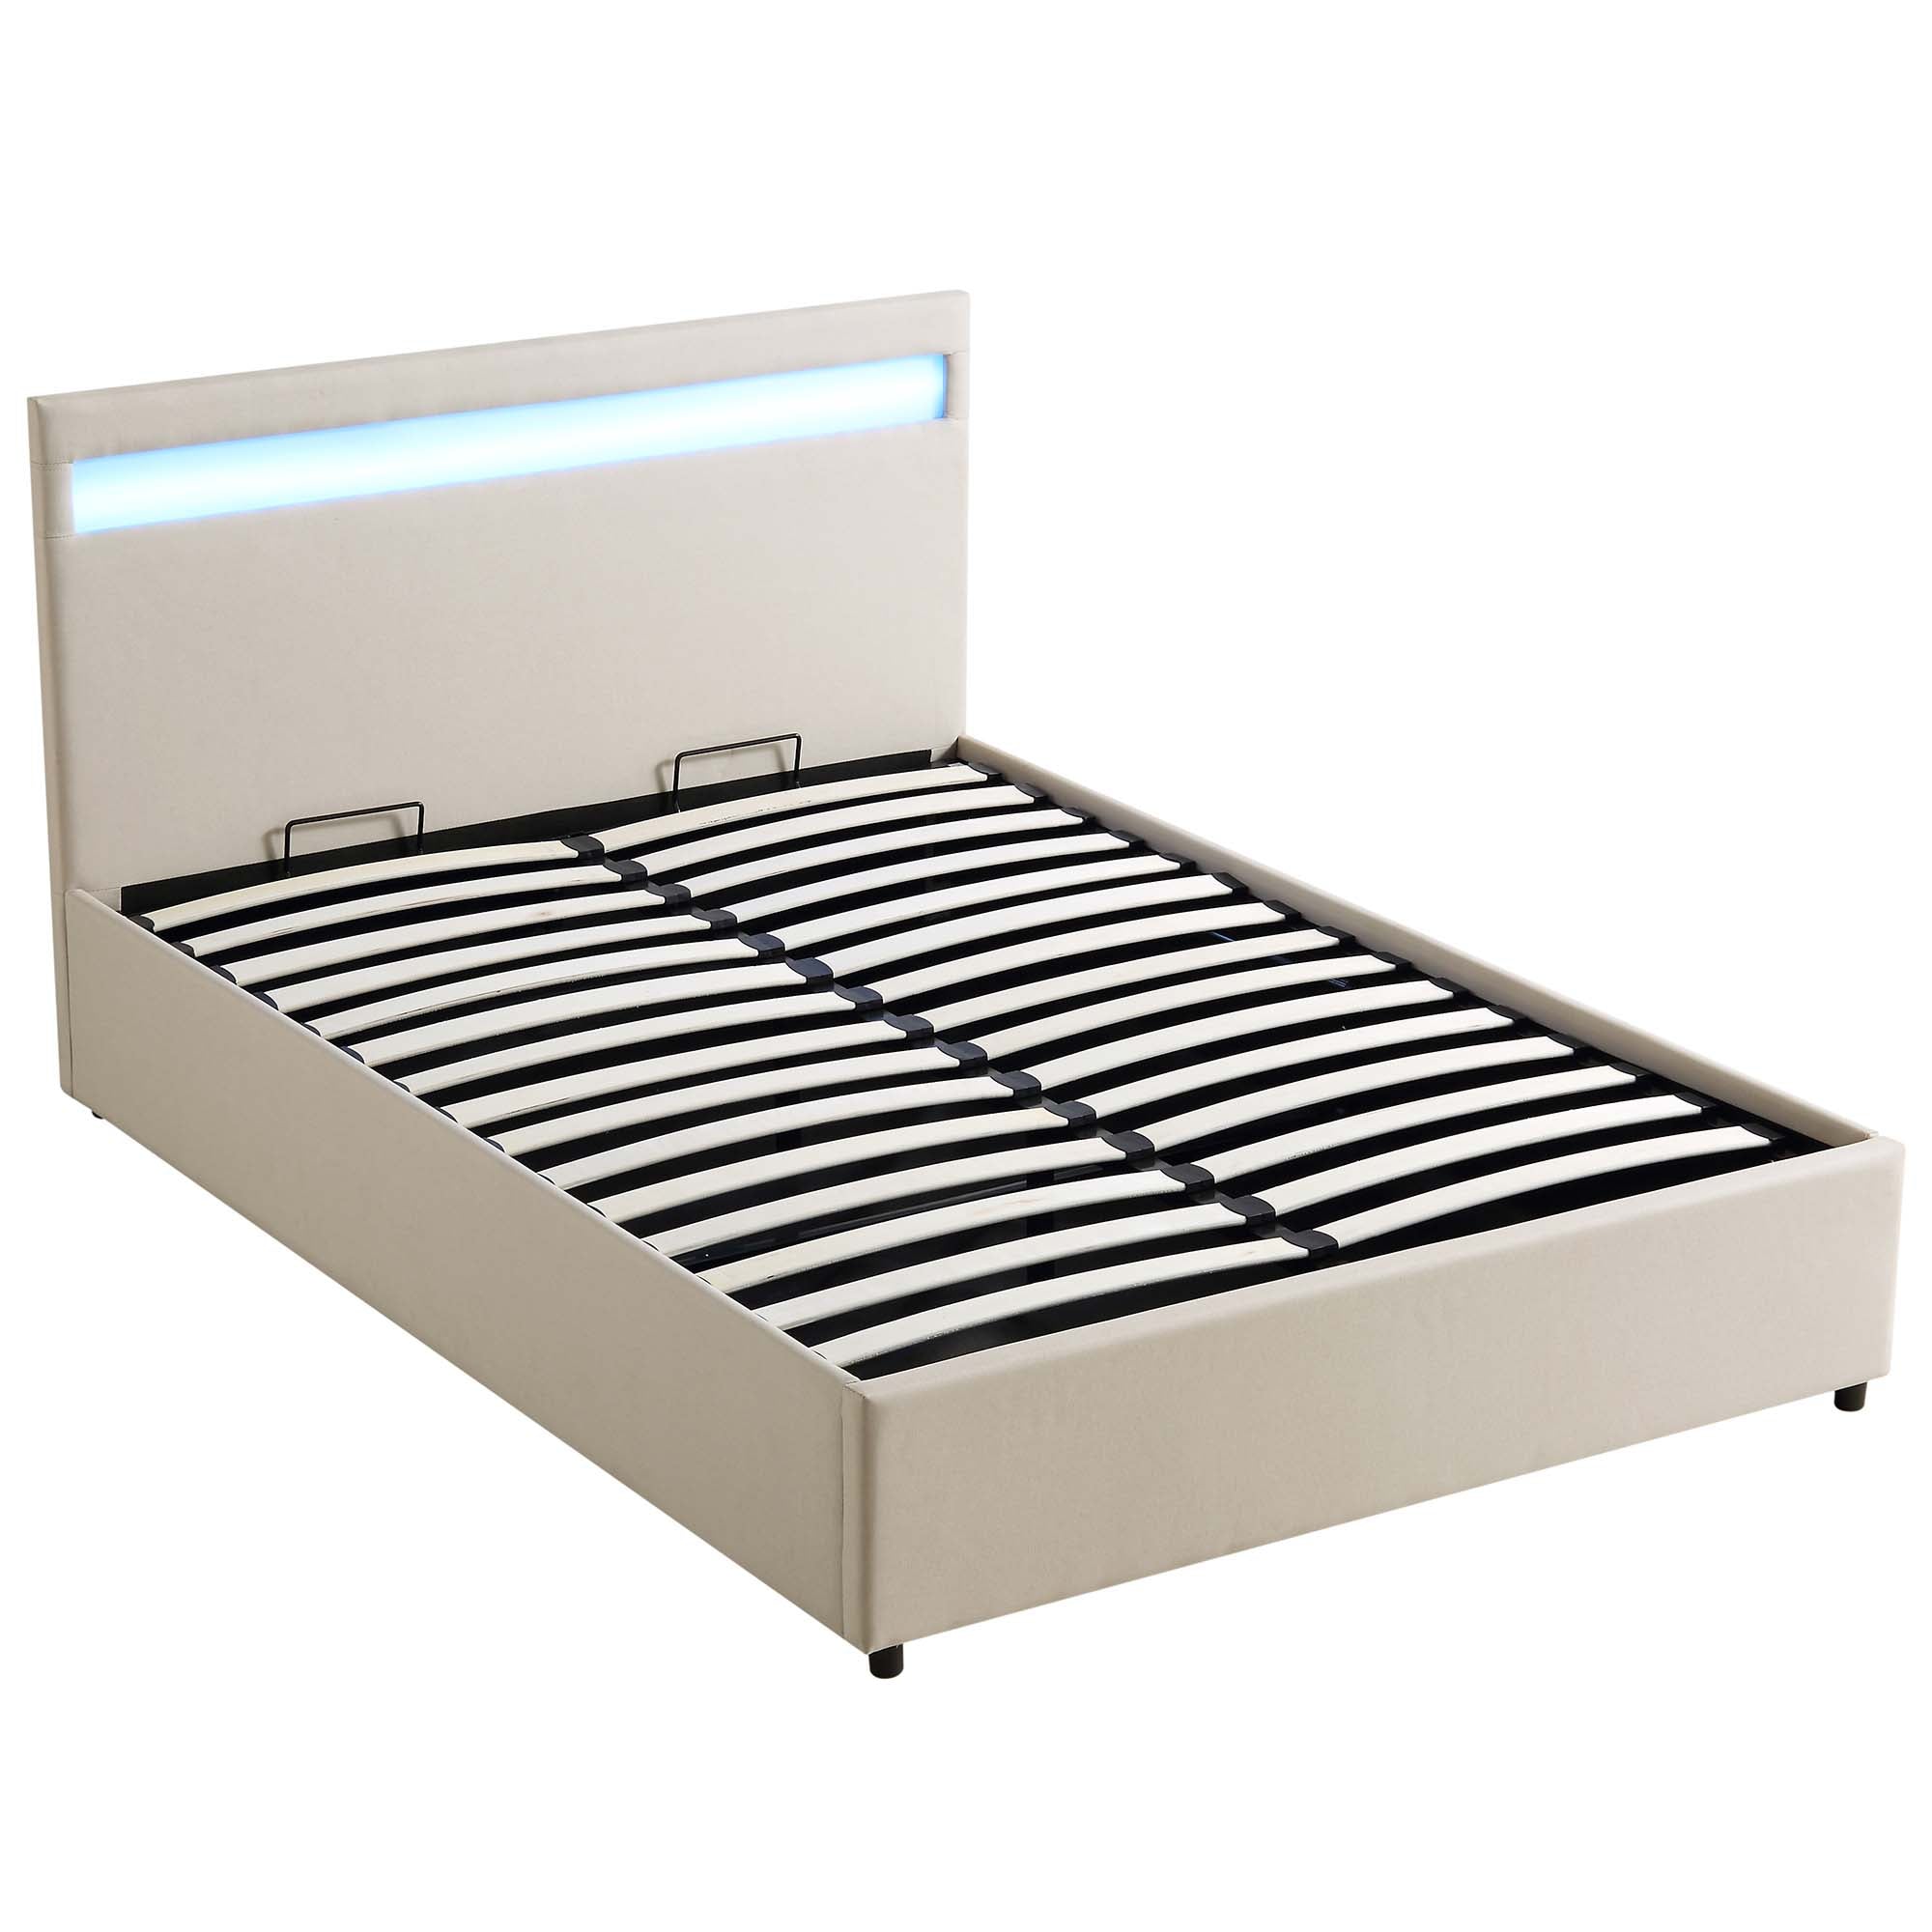 Pimlico End Opening Ottoman Storage Bed Frame with Muti-colour LED Headboard (Beige Fabric)